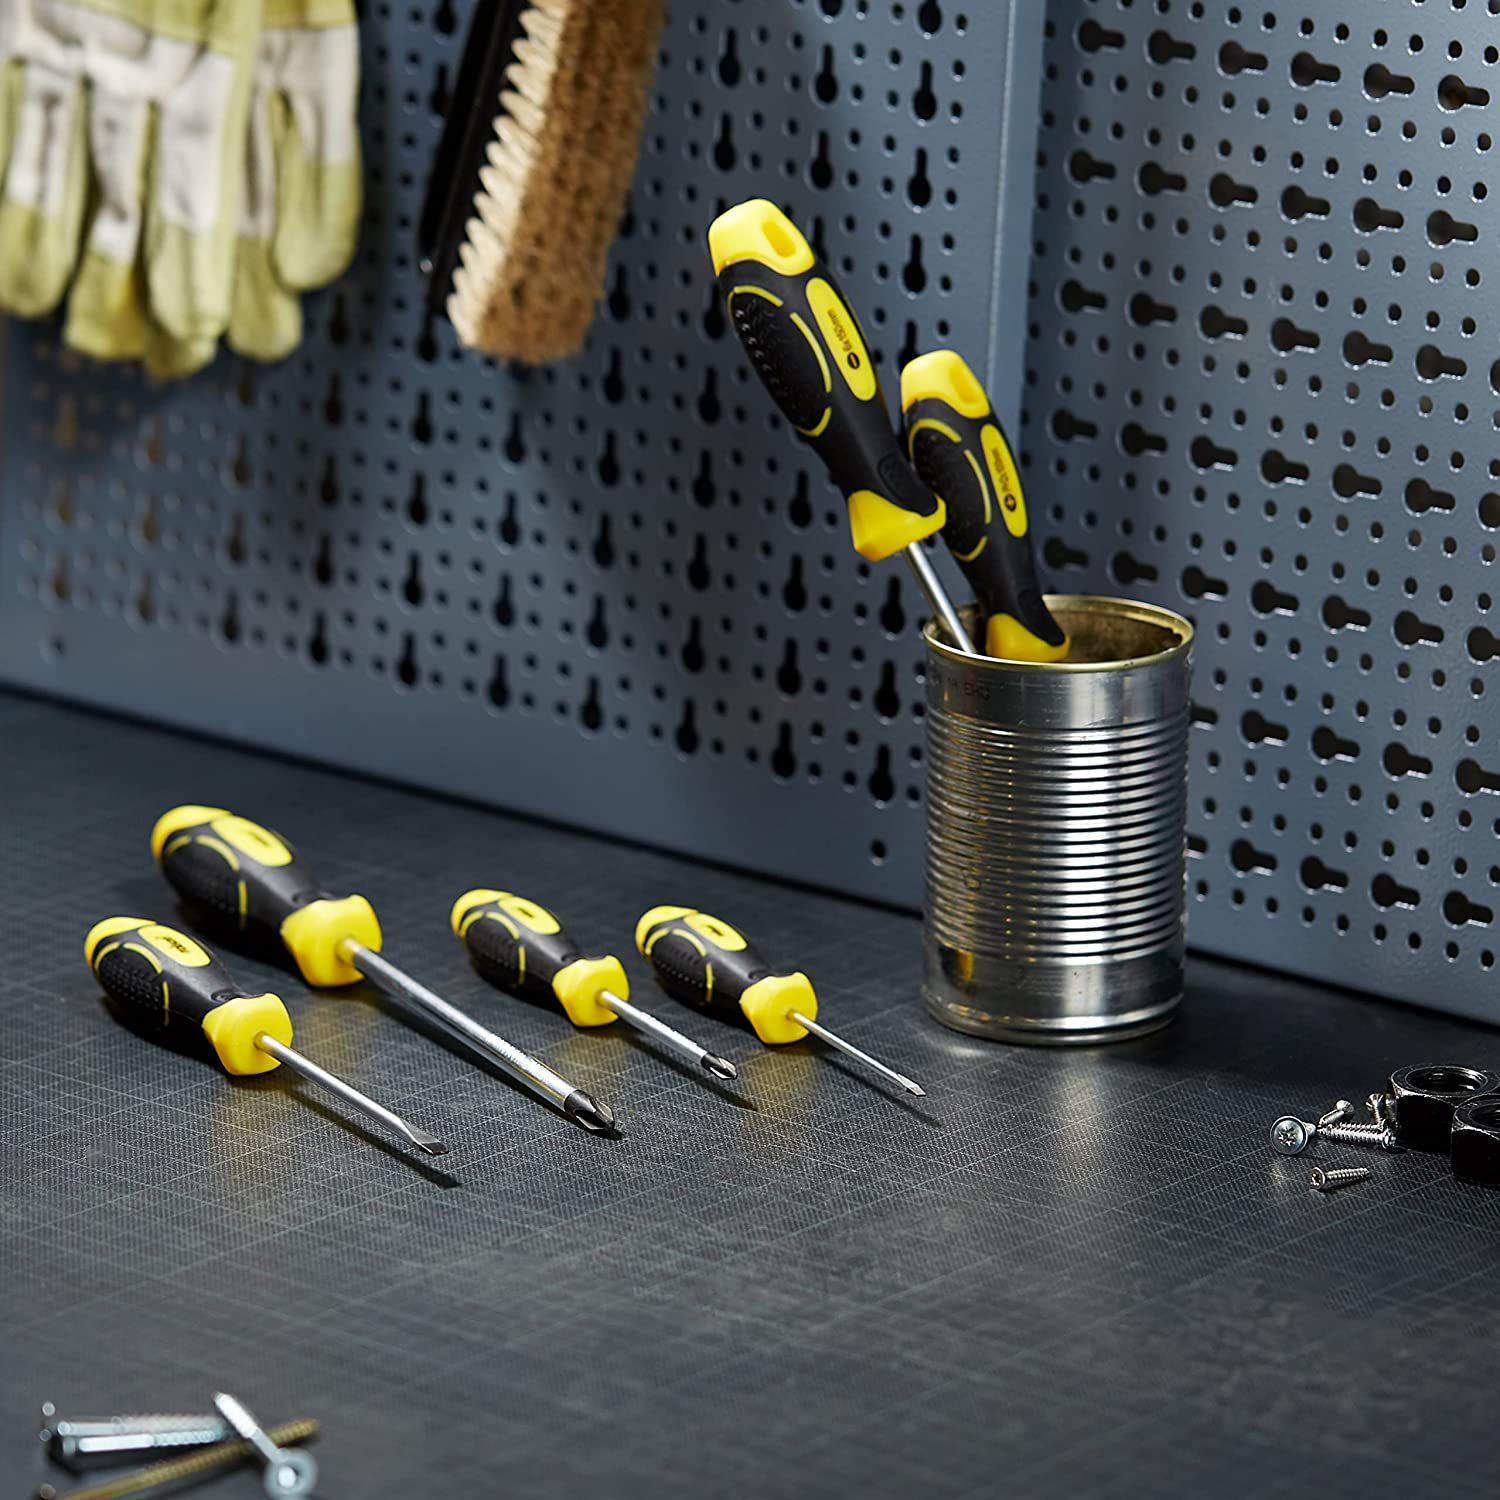 Reviewing Rolson Screwdriver Bit Set: Unscrewing Your Problems in 20 Different Ways